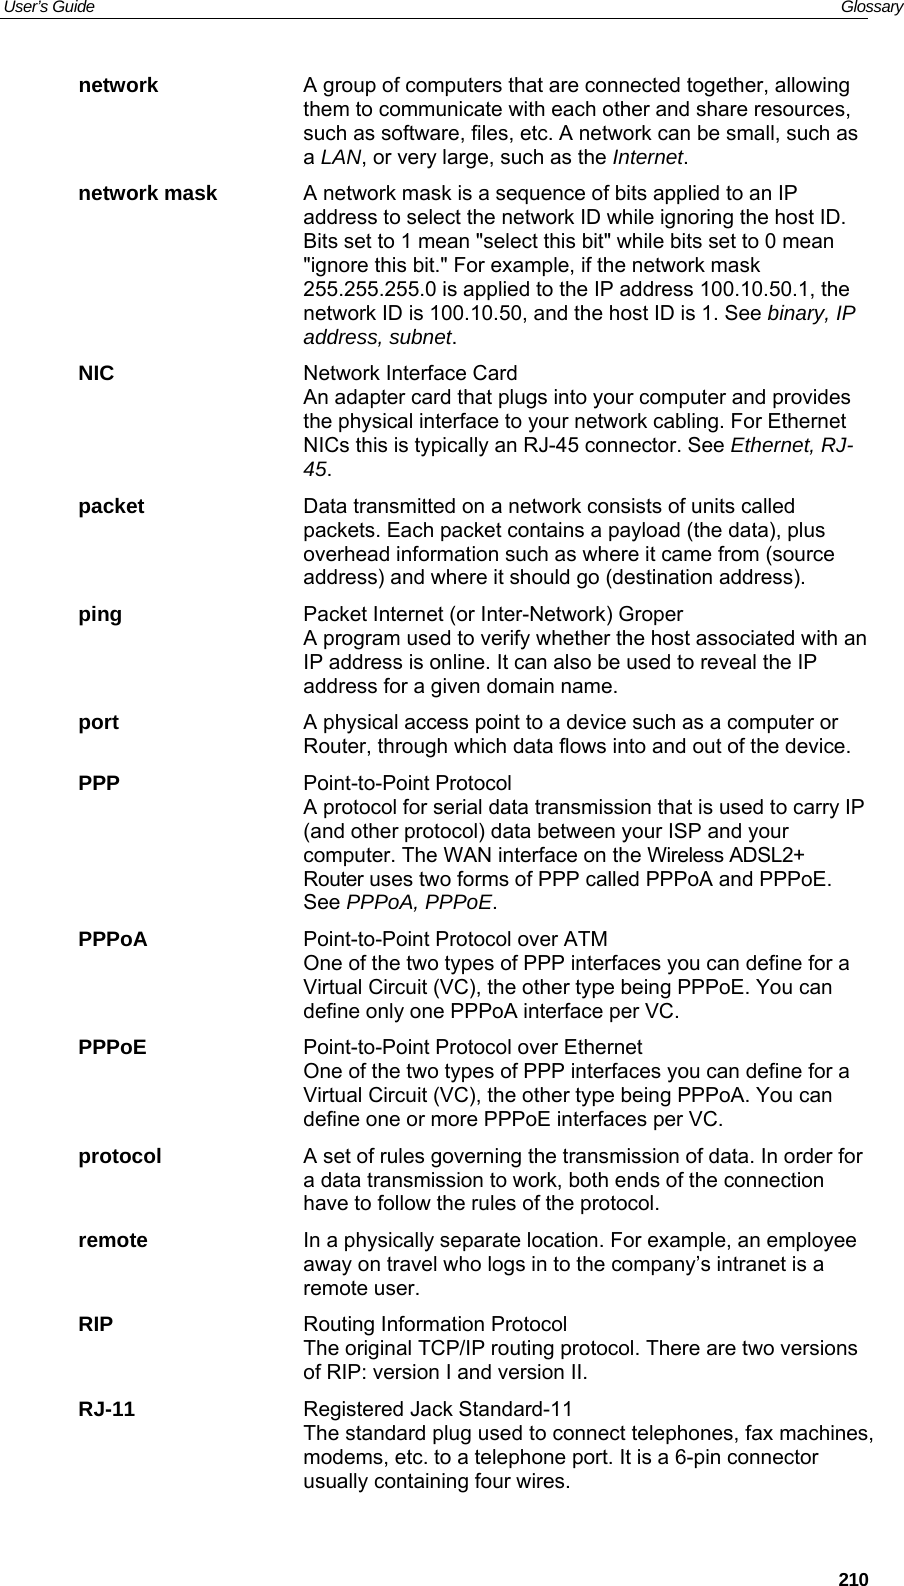 User’s Guide   Glossary network  A group of computers that are connected together, allowing them to communicate with each other and share resources, such as software, files, etc. A network can be small, such as a LAN, or very large, such as the Internet. network mask  A network mask is a sequence of bits applied to an IP address to select the network ID while ignoring the host ID. Bits set to 1 mean &quot;select this bit&quot; while bits set to 0 mean &quot;ignore this bit.&quot; For example, if the network mask 255.255.255.0 is applied to the IP address 100.10.50.1, the network ID is 100.10.50, and the host ID is 1. See binary, IP address, subnet. NIC  Network Interface Card An adapter card that plugs into your computer and provides the physical interface to your network cabling. For Ethernet NICs this is typically an RJ-45 connector. See Ethernet, RJ-45. packet  Data transmitted on a network consists of units called packets. Each packet contains a payload (the data), plus overhead information such as where it came from (source address) and where it should go (destination address). ping  Packet Internet (or Inter-Network) Groper A program used to verify whether the host associated with an IP address is online. It can also be used to reveal the IP address for a given domain name.  port  A physical access point to a device such as a computer or Router, through which data flows into and out of the device. PPP Point-to-Point Protocol A protocol for serial data transmission that is used to carry IP (and other protocol) data between your ISP and your computer. The WAN interface on the Wireless ADSL2+ Router uses two forms of PPP called PPPoA and PPPoE. See PPPoA, PPPoE. PPPoA  Point-to-Point Protocol over ATM One of the two types of PPP interfaces you can define for a Virtual Circuit (VC), the other type being PPPoE. You can define only one PPPoA interface per VC. PPPoE  Point-to-Point Protocol over Ethernet One of the two types of PPP interfaces you can define for a Virtual Circuit (VC), the other type being PPPoA. You can define one or more PPPoE interfaces per VC. protocol  A set of rules governing the transmission of data. In order for a data transmission to work, both ends of the connection have to follow the rules of the protocol. remote  In a physically separate location. For example, an employee away on travel who logs in to the company’s intranet is a remote user. RIP  Routing Information Protocol The original TCP/IP routing protocol. There are two versions of RIP: version I and version II.  RJ-11  Registered Jack Standard-11 The standard plug used to connect telephones, fax machines, modems, etc. to a telephone port. It is a 6-pin connector usually containing four wires.  210